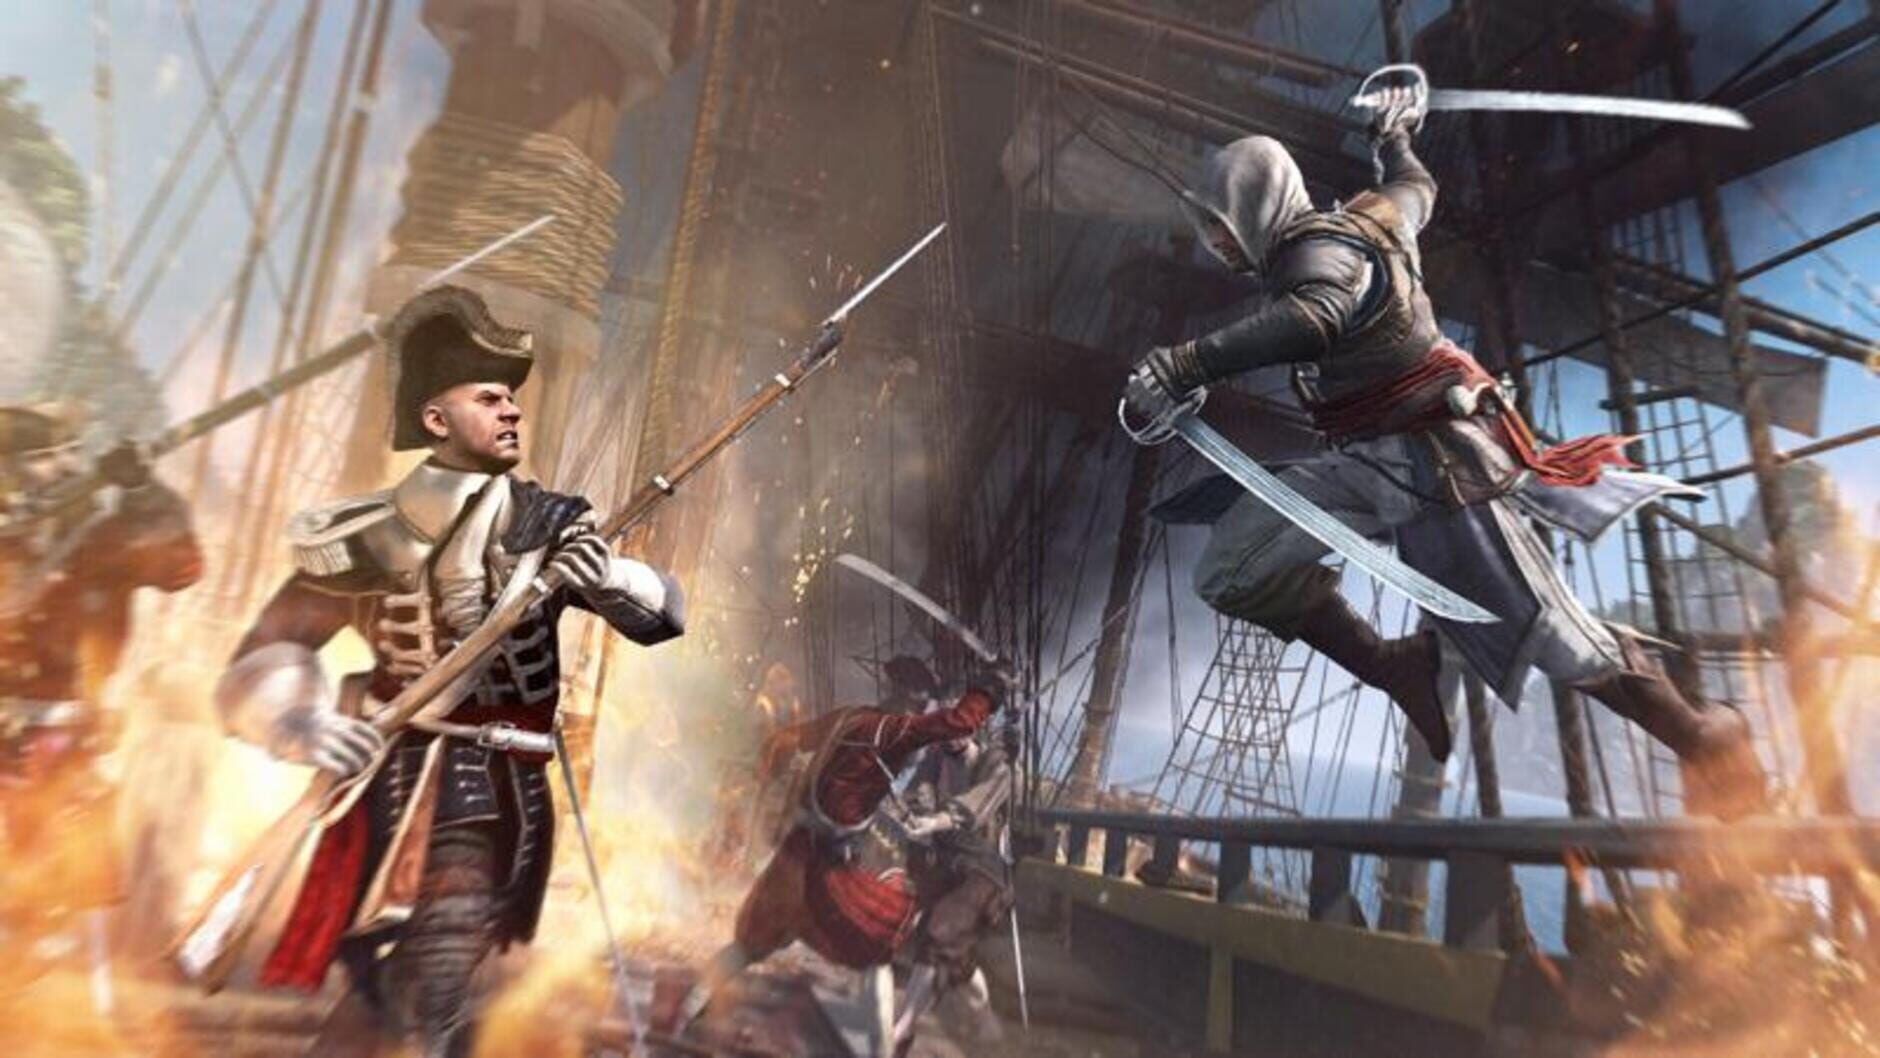 Screenshot for Assassin's Creed IV Black Flag: Guild of Rogues